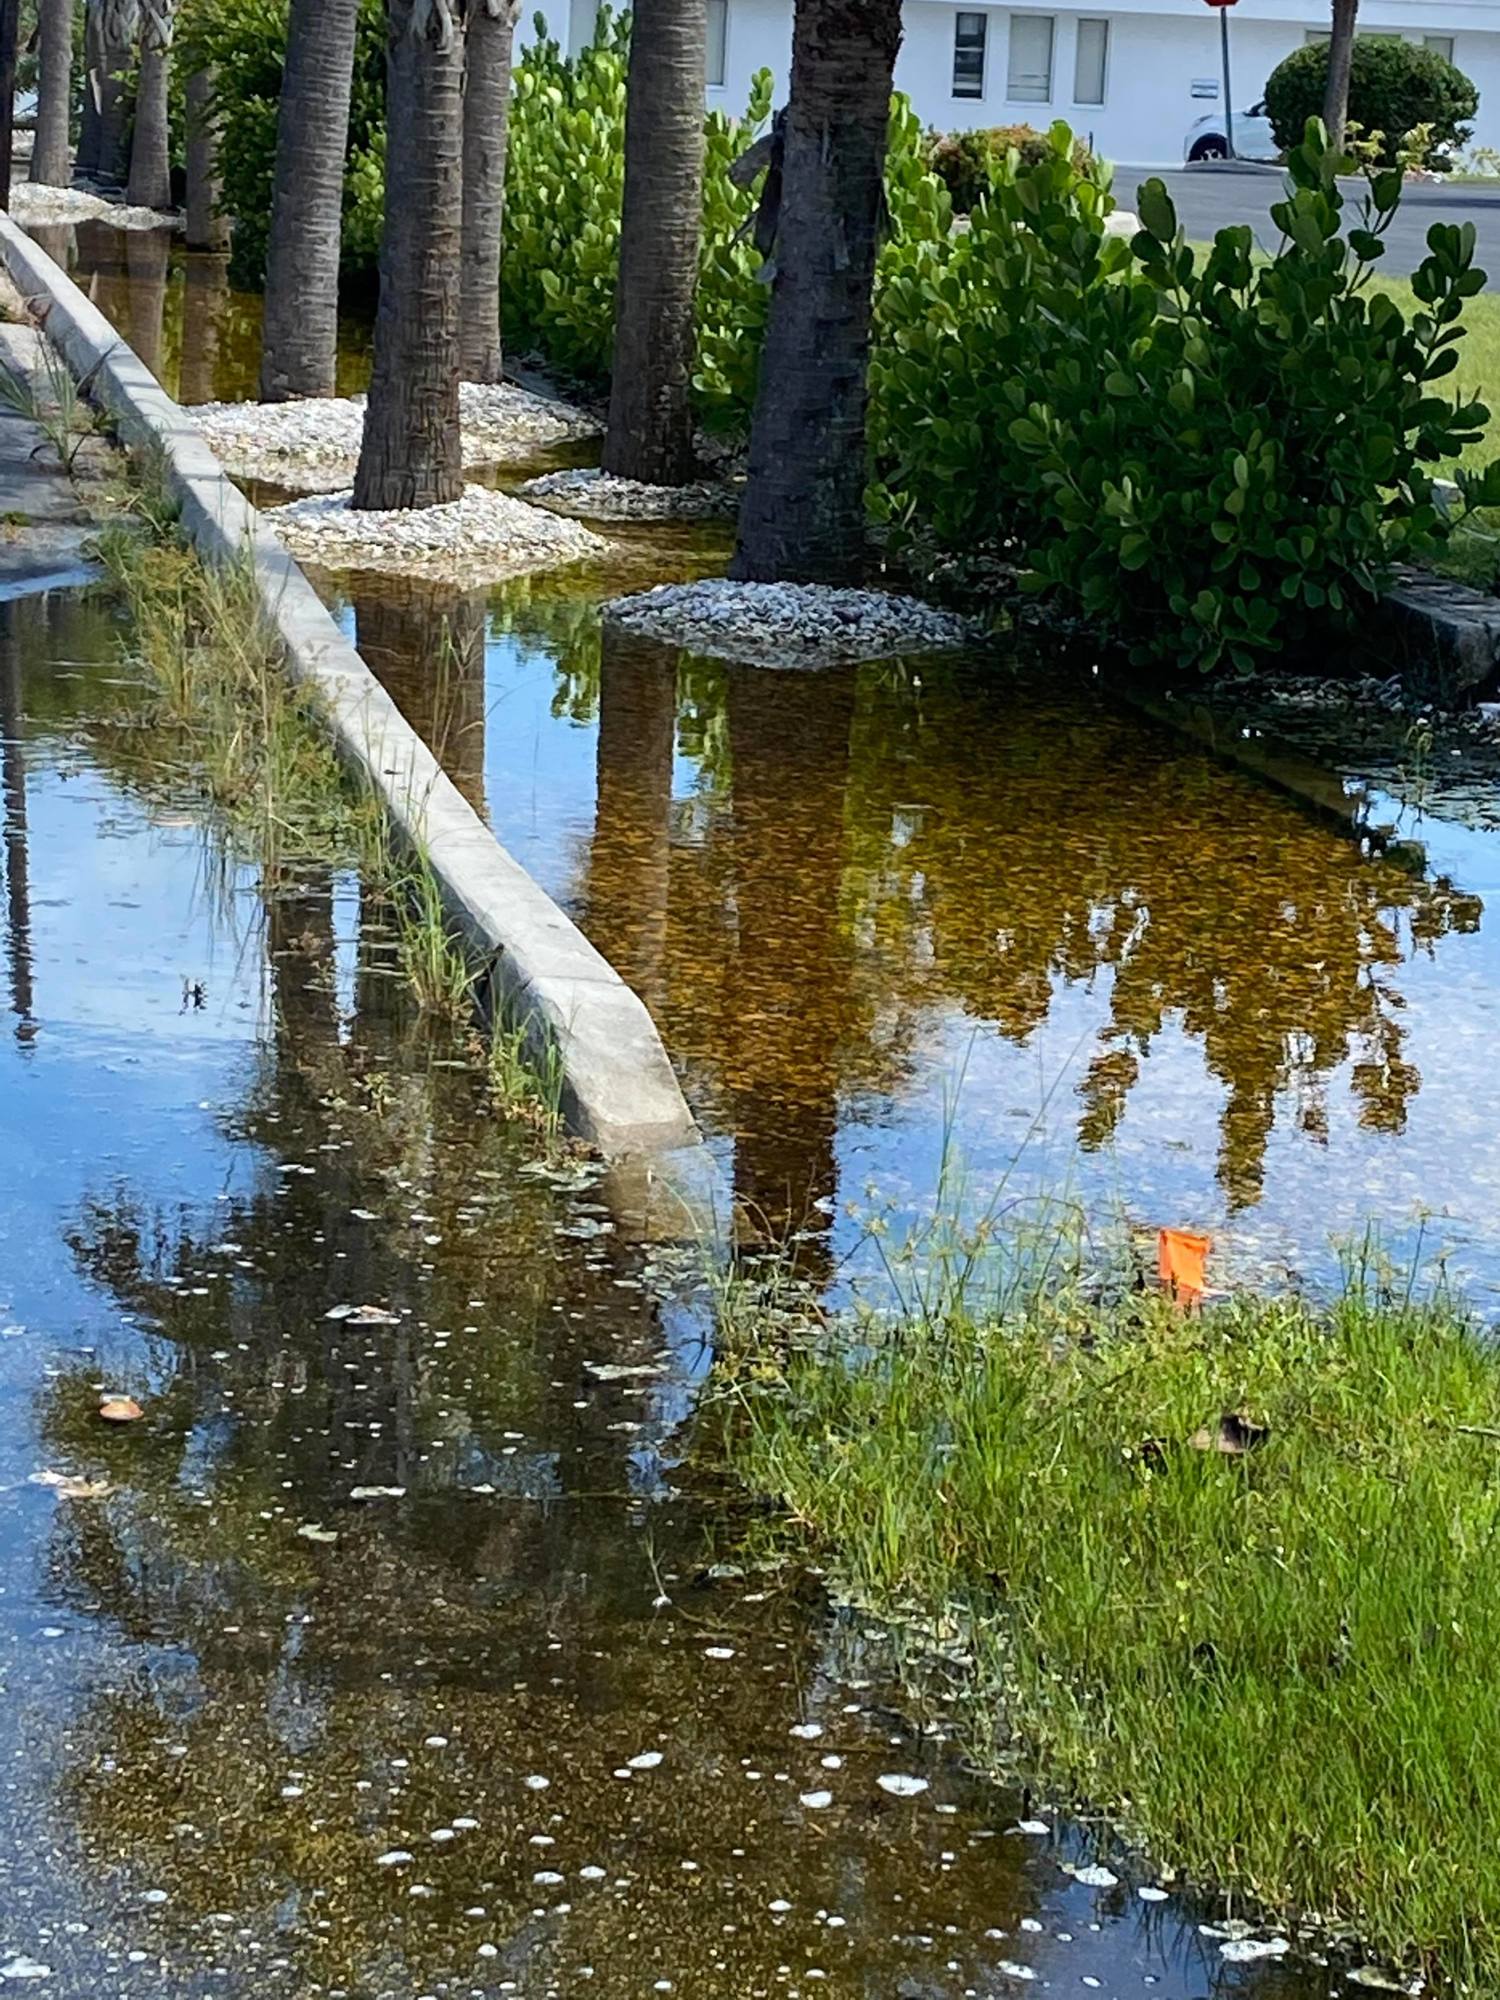 The bioswale between Ross Toussaint's property and Christ Church of Longboat Key was filled with stormwater runoff on July 25. Photo Credit: Ross Toussaint